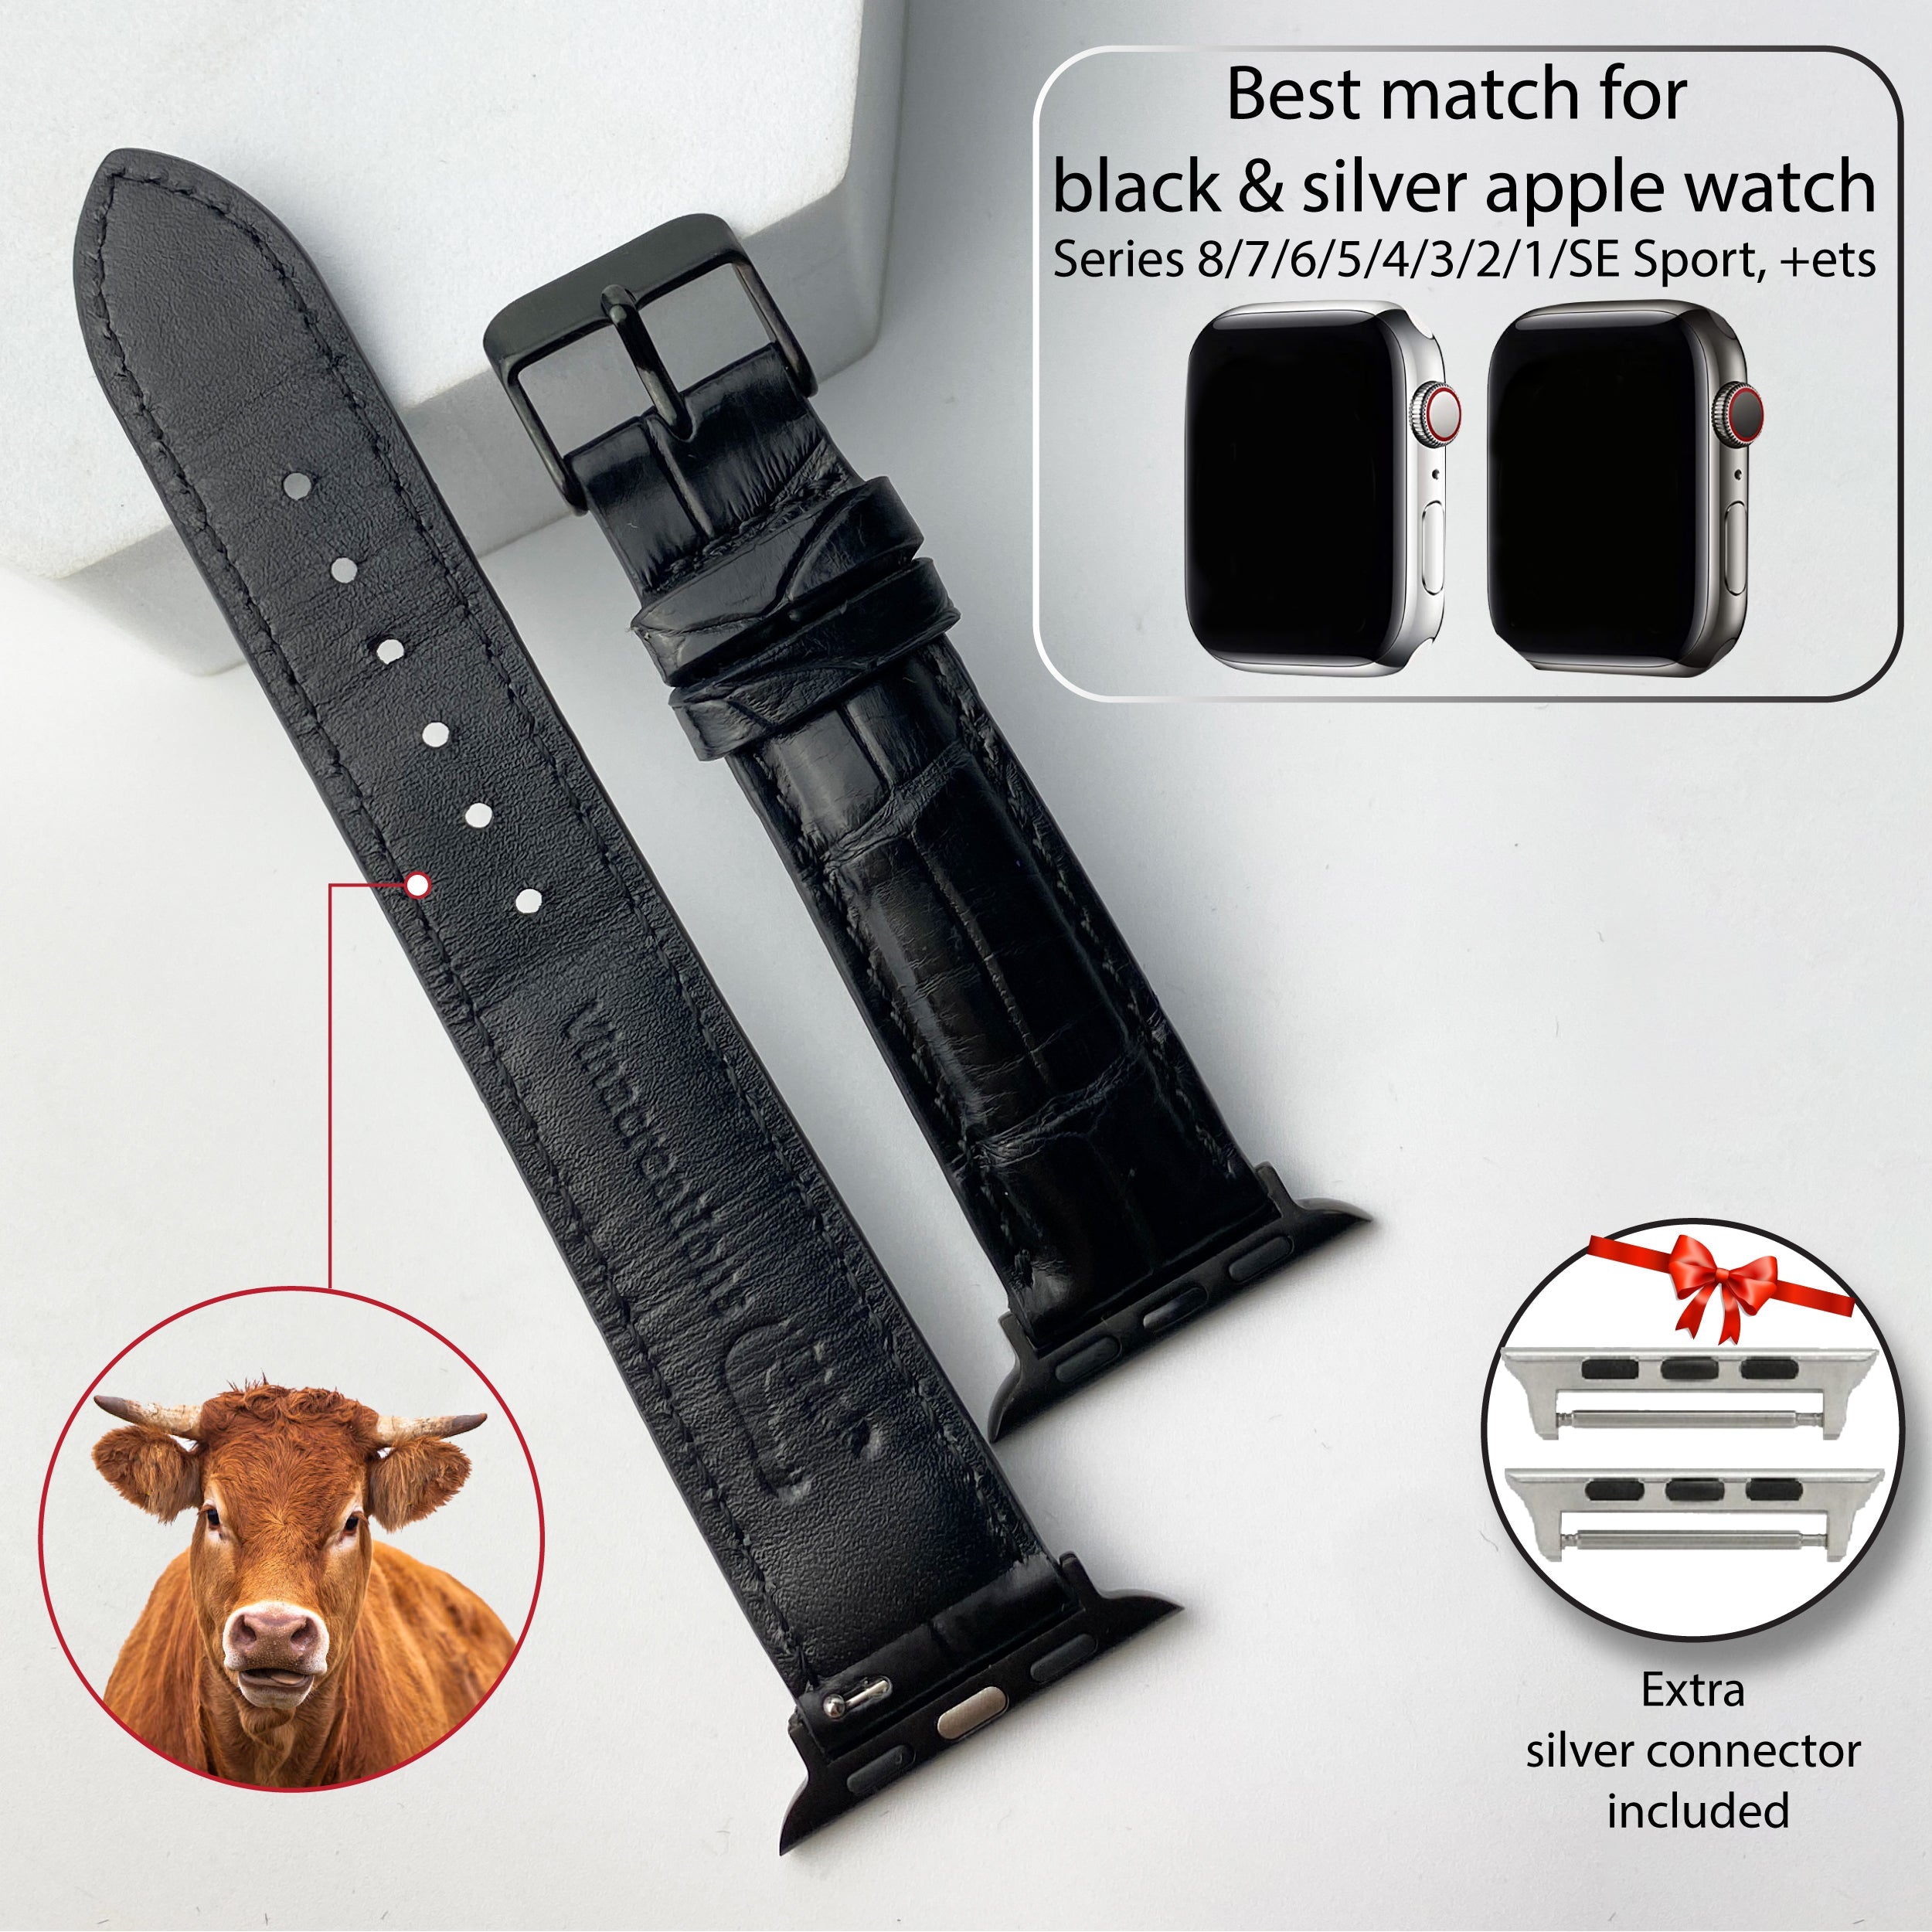 Black Alligator Leather Strap for Apple Watch IWatch Ultra Series 8 7 6 5 4 3 SE - Vinacreations